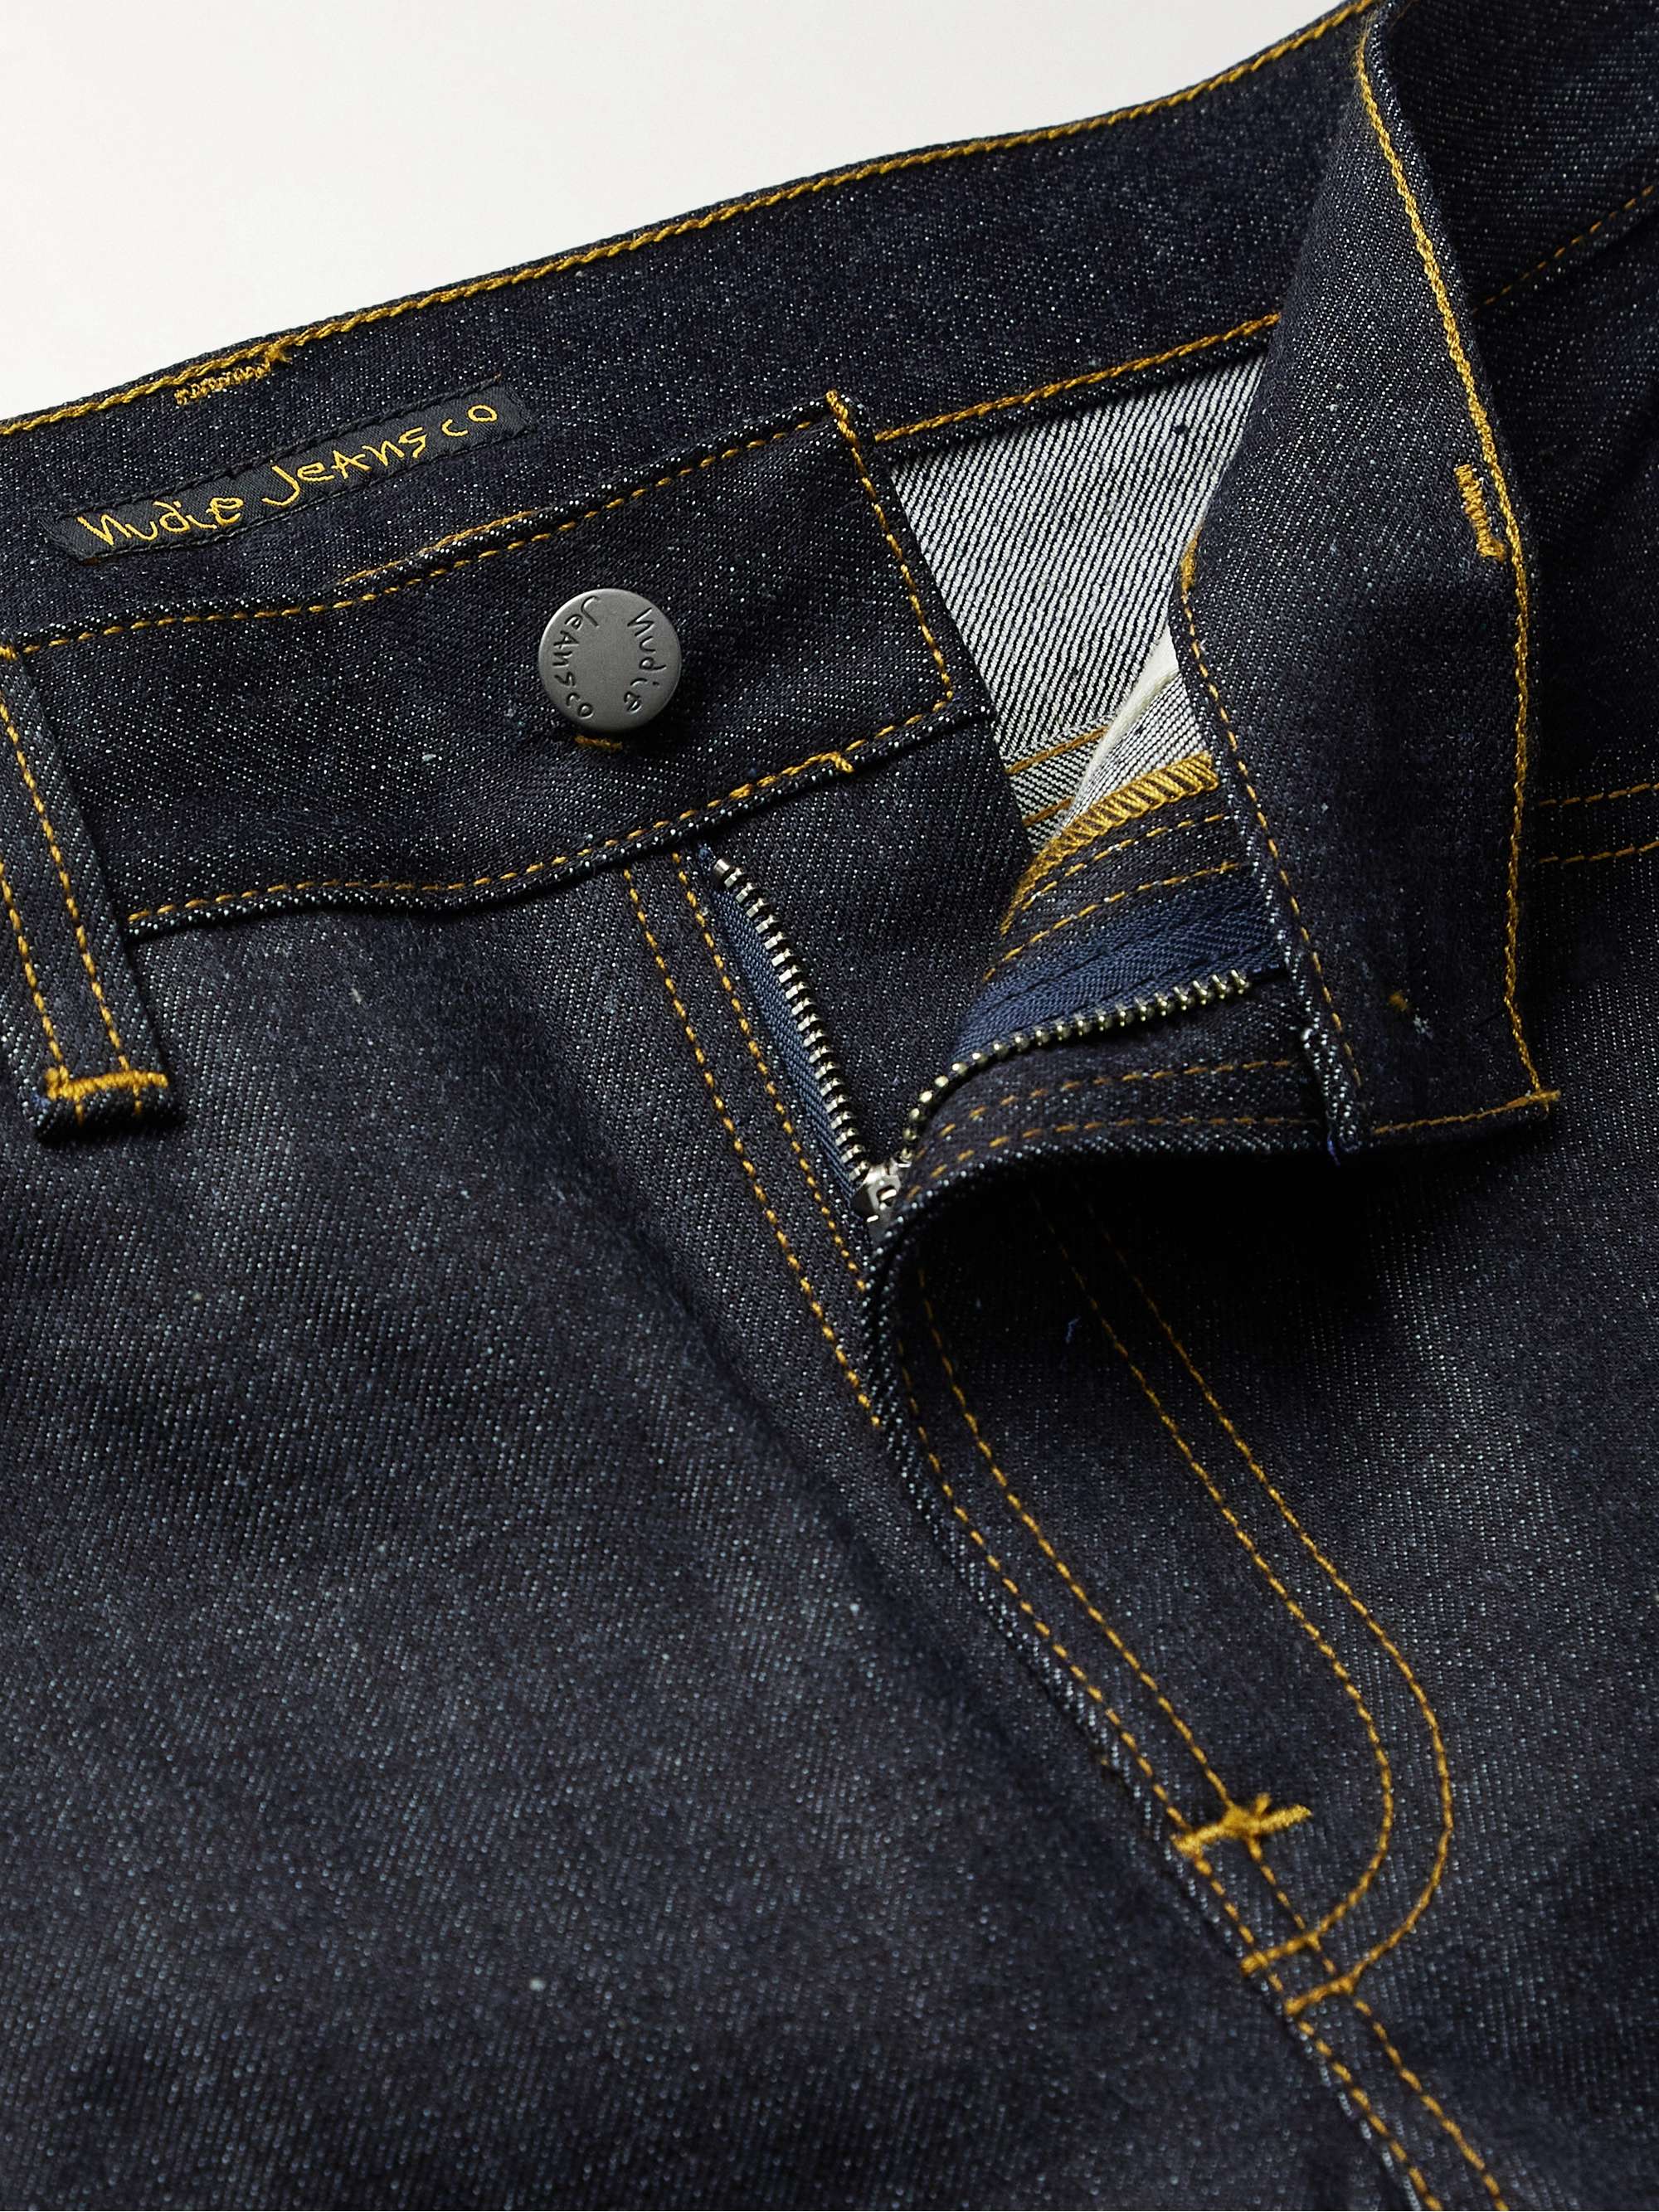 NUDIE JEANS Gritty Jackson Straight-Leg Selvage Jeans | MR PORTER